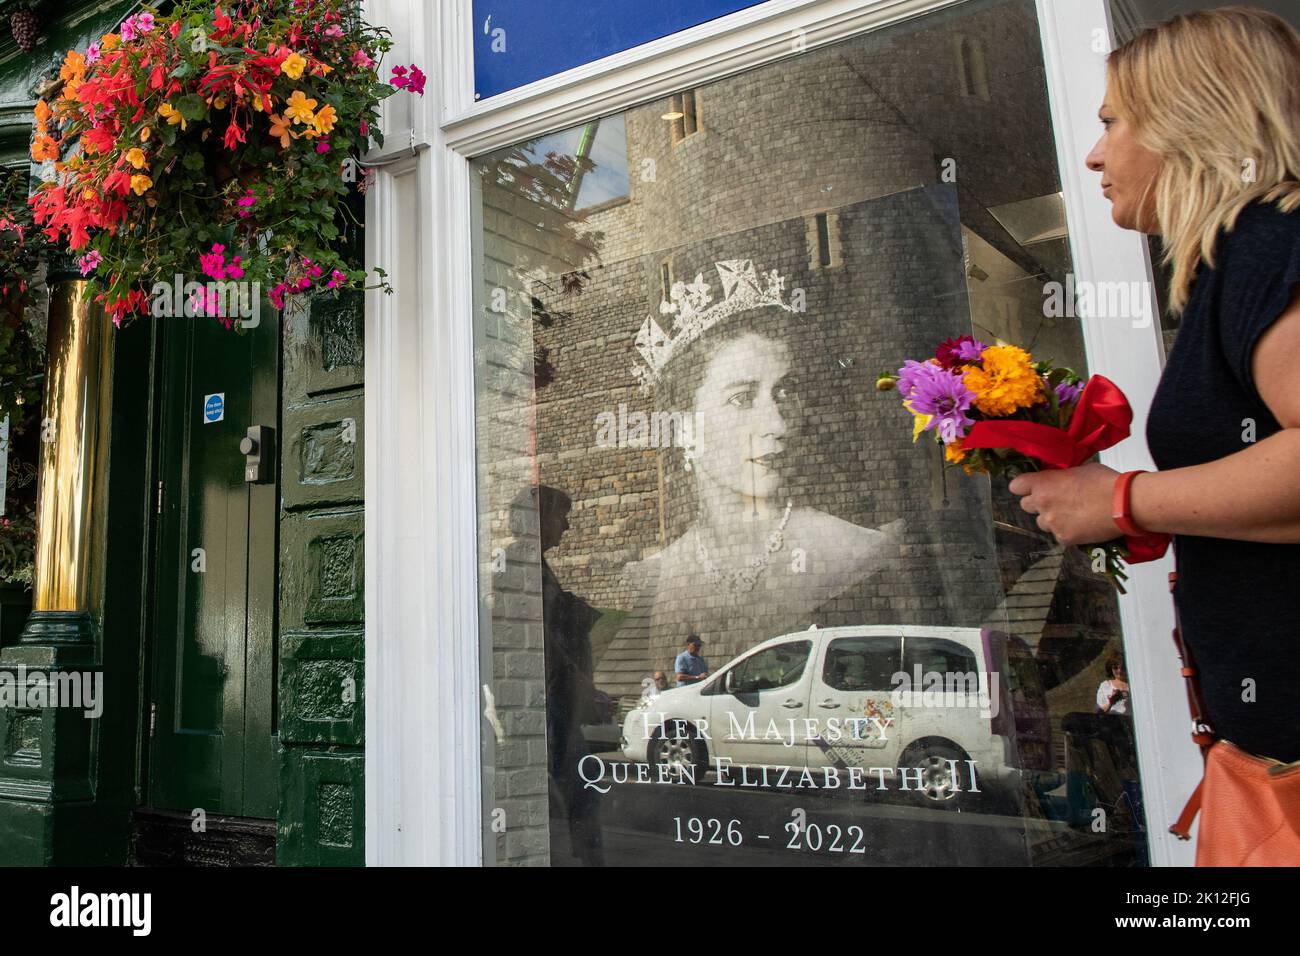 Windsor, UK. 14th September, 2022. A woman carrying flowers passes a tribute to Queen Elizabeth II displayed in a shop window. Queen Elizabeth II, the UK's longest-serving monarch, died at Balmoral aged 96 on 8th September after a reign lasting 70 years and will be buried in the King George VI memorial chapel in Windsor following a state funeral in Westminster Abbey on 19th September. Credit: Mark Kerrison/Alamy Live News Stock Photo